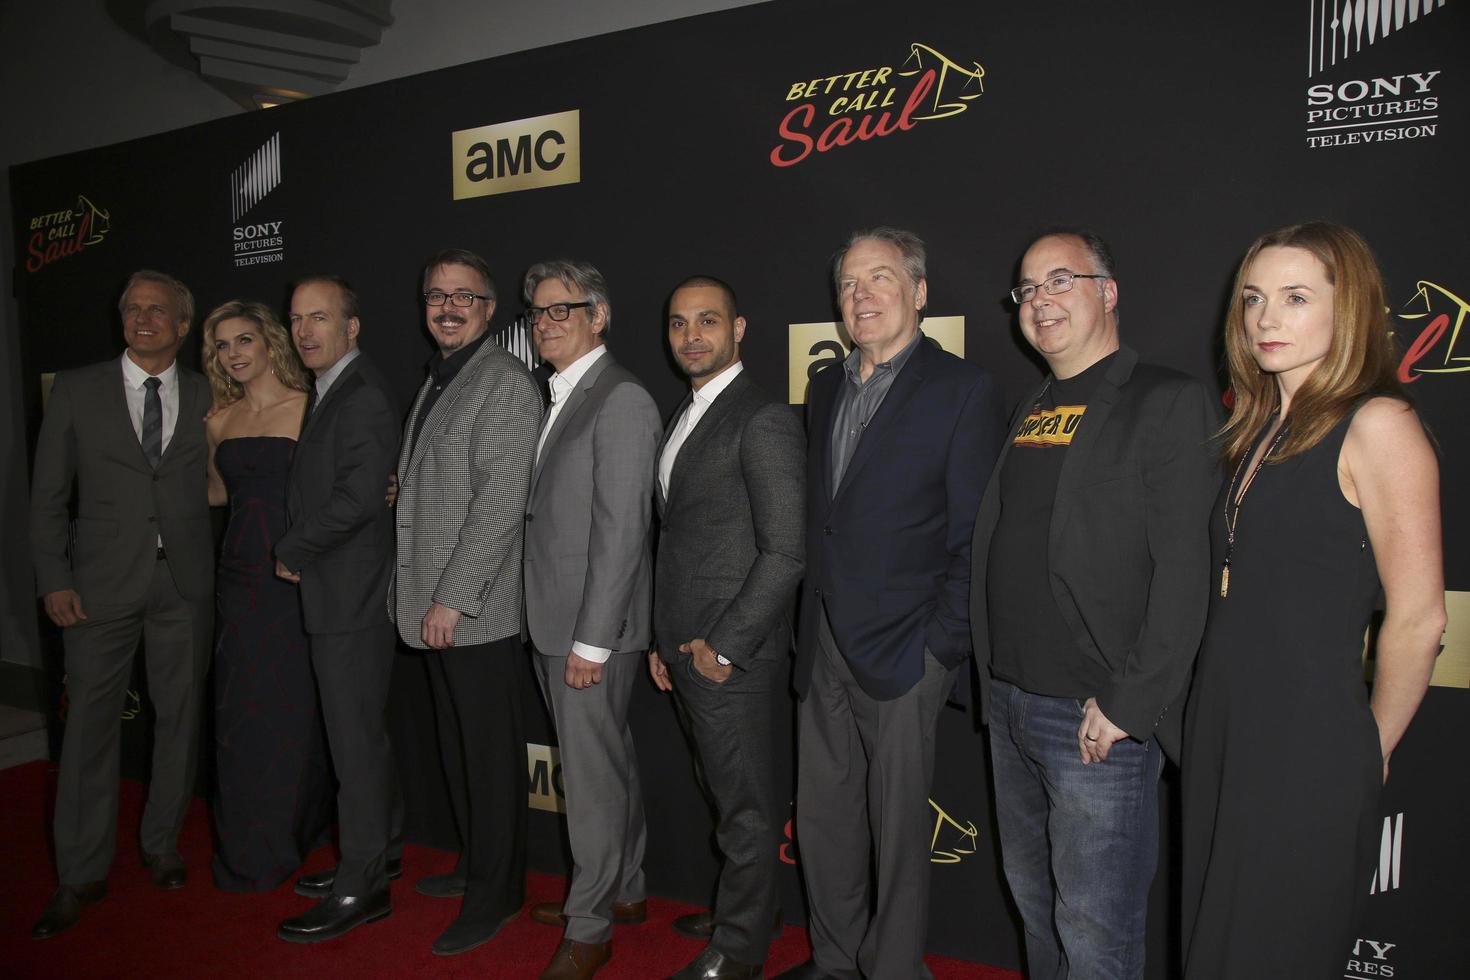 LOS ANGELES, FEB 2 - Better Call Saul Cast and Crew at the Better Call Saul Season Two Special Screening at the ArcLight on February 2, 2016 in Culver City, CA photo